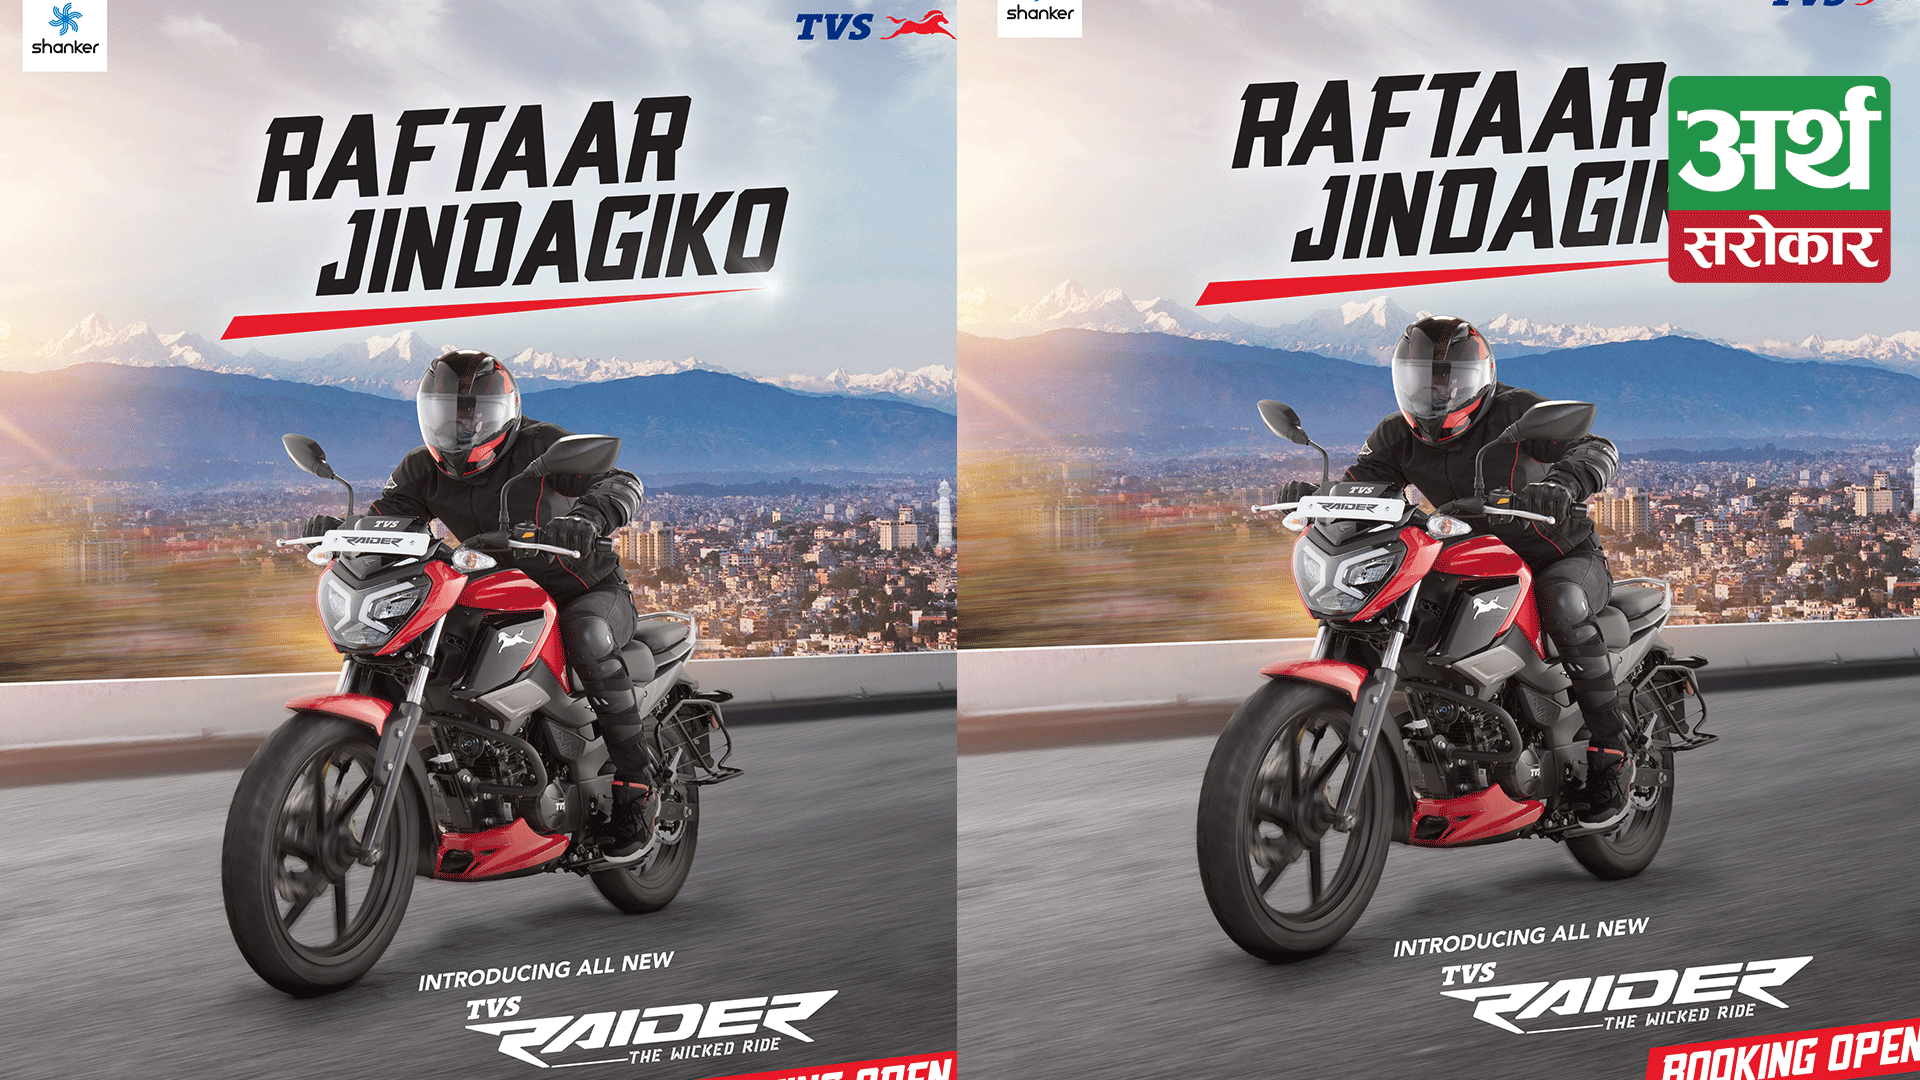 TVS Motor Company Opens Booking for Naked Street Design ‘TVS Raider’ motorcycle in Nepal from today